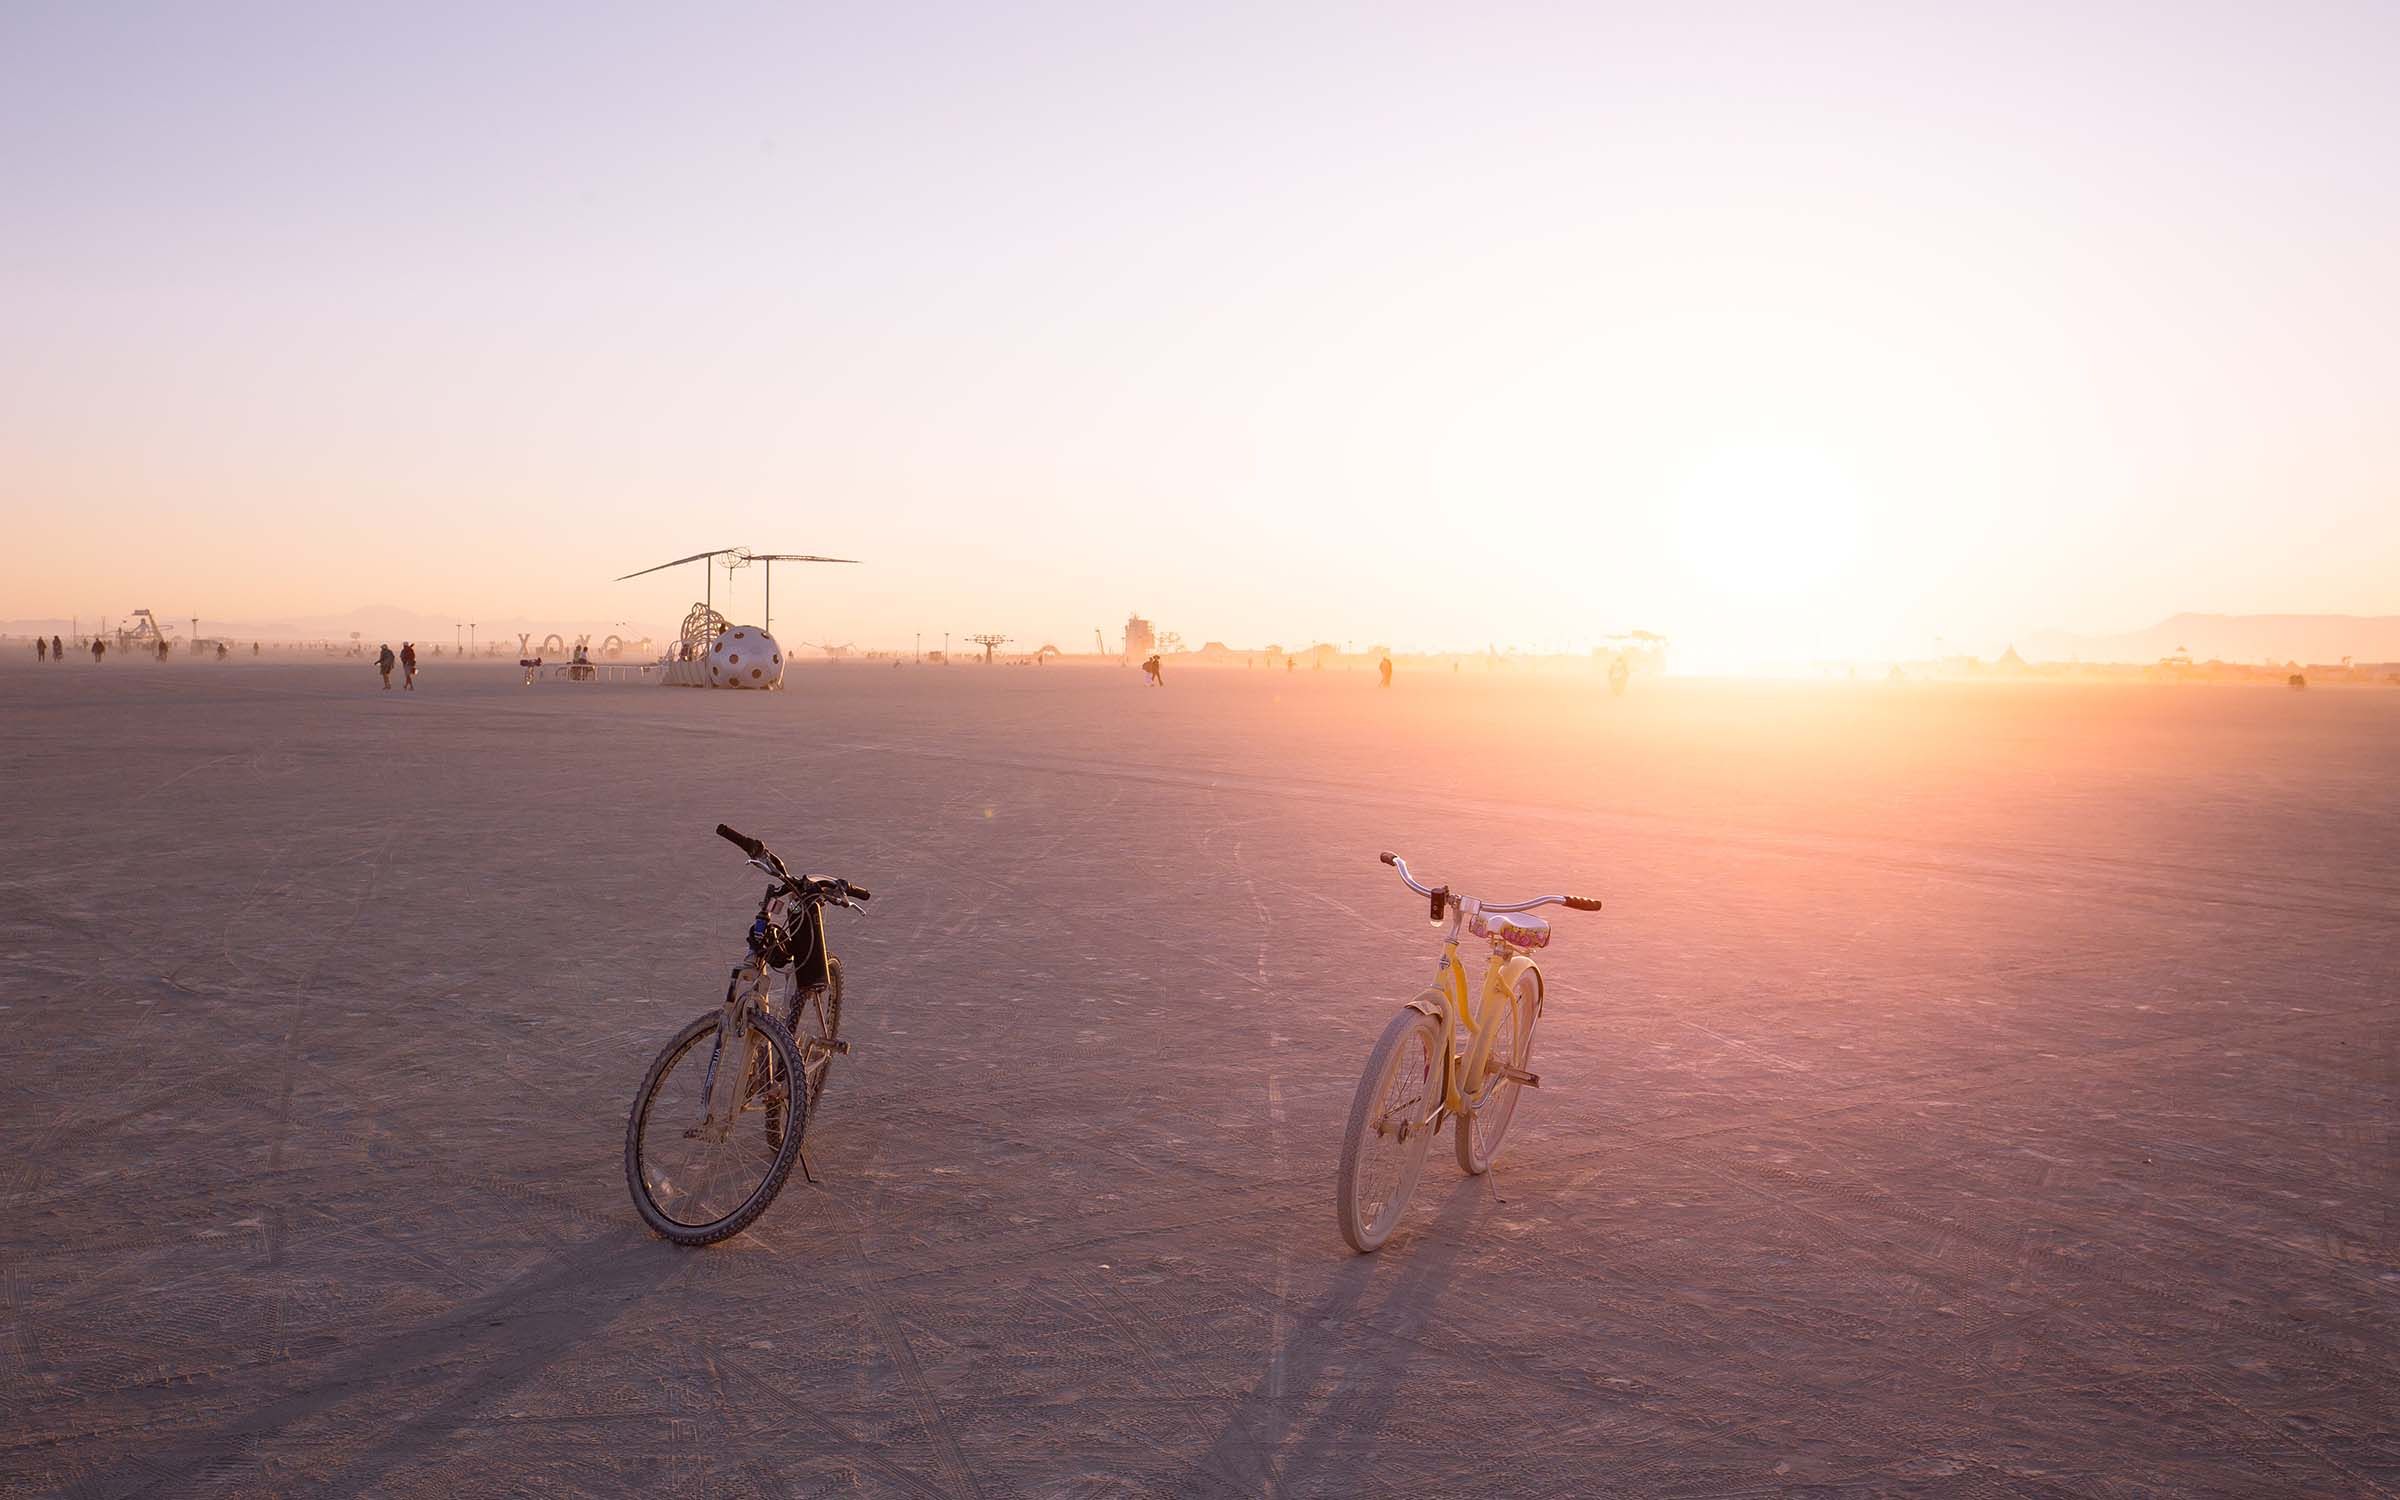 The burning man festival in northern nevada